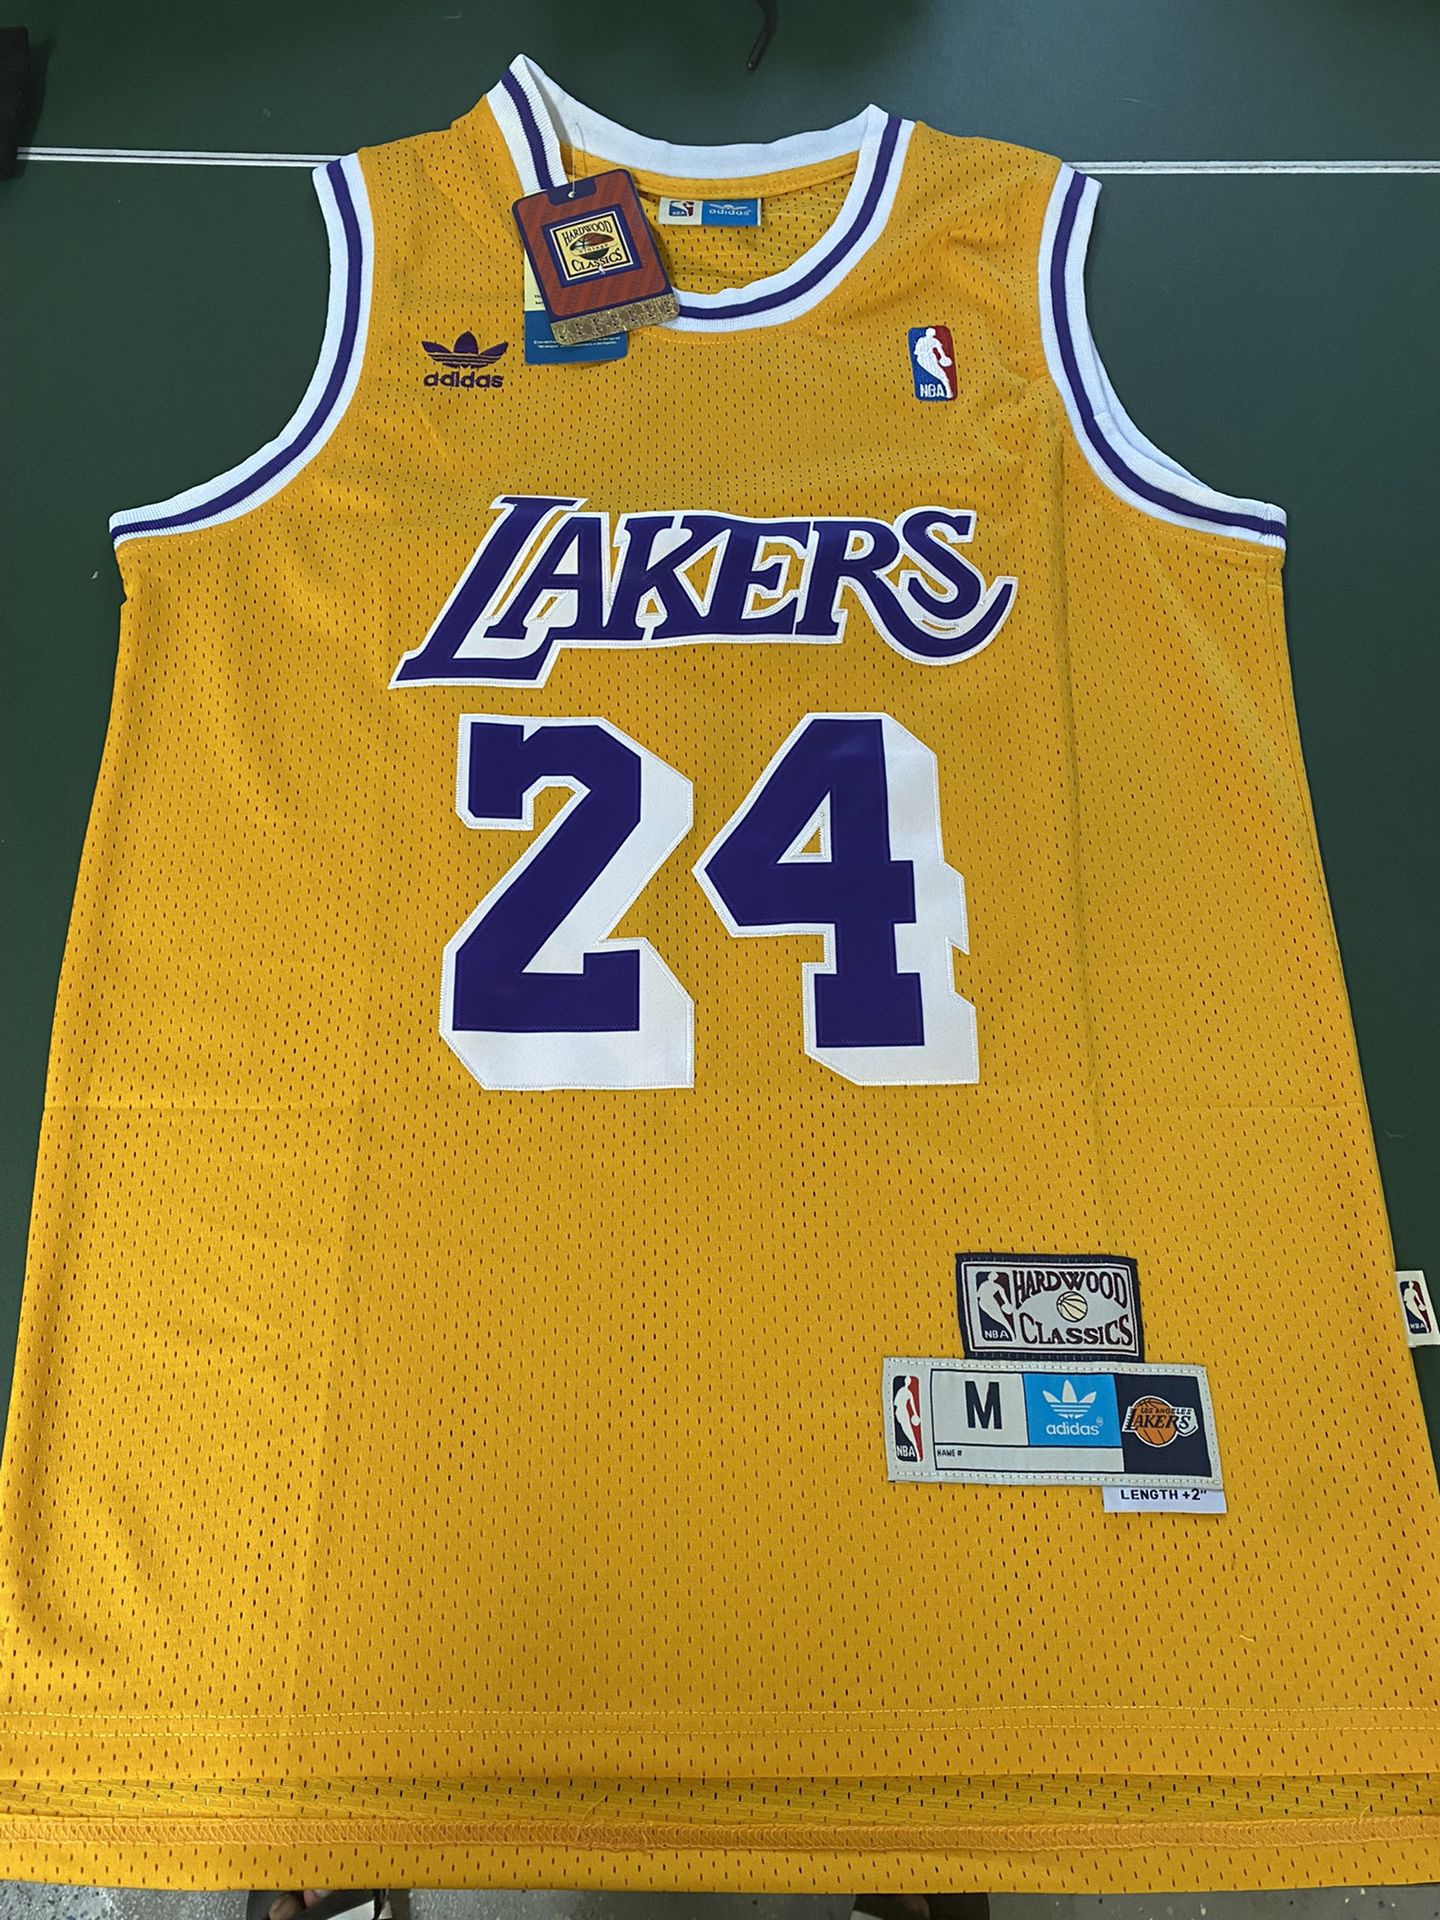 Kobe Bryant Lakers NBA Jersey for Sale in Conroe, TX - OfferUp